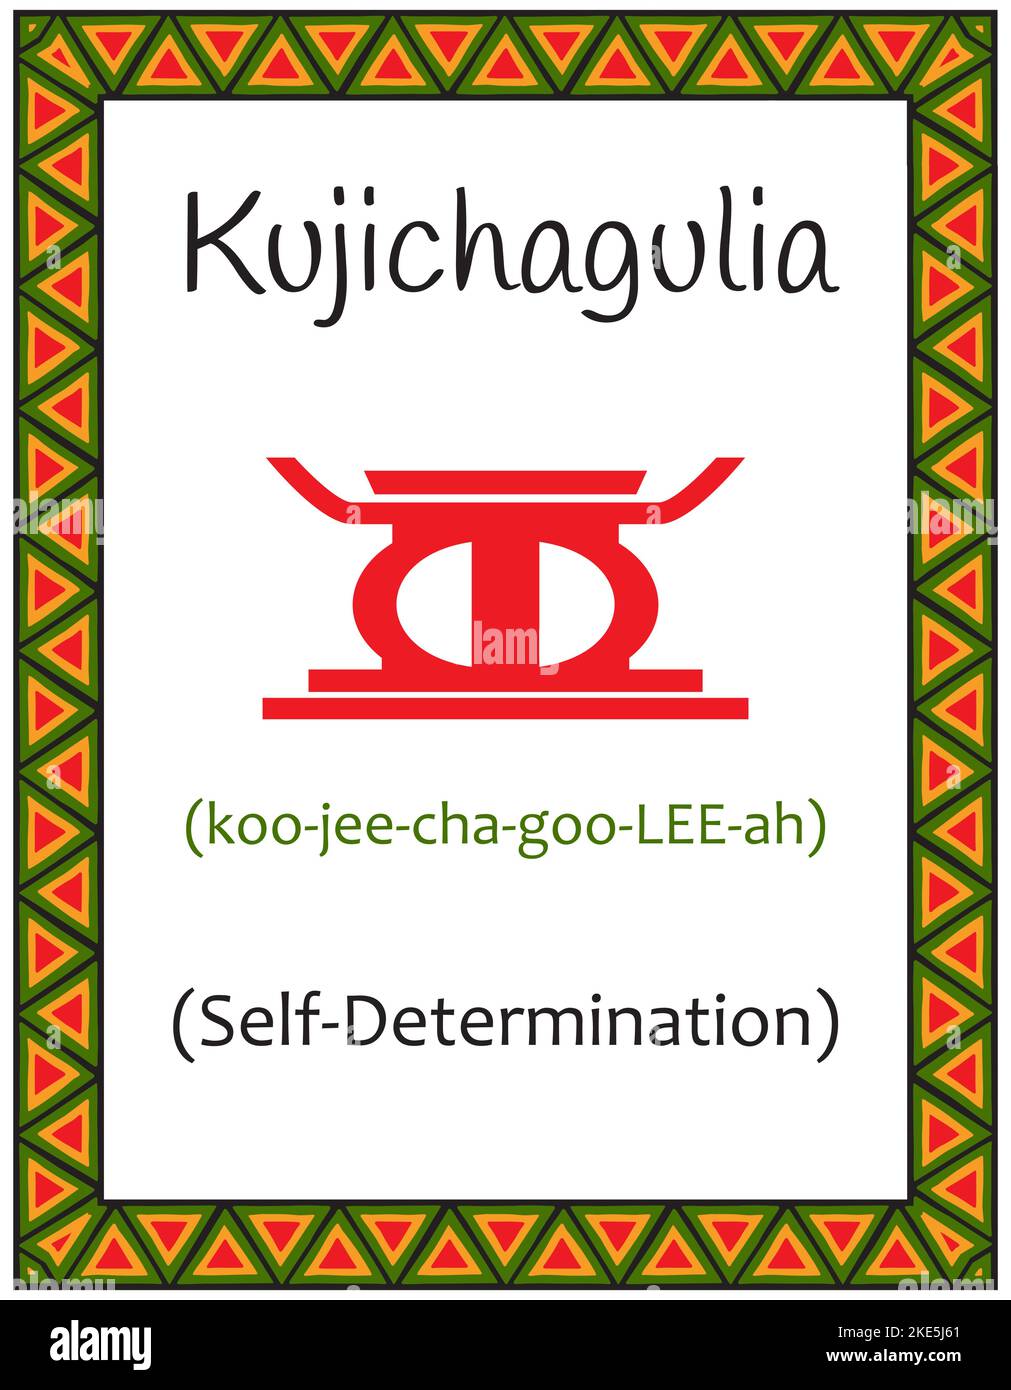 A card with one of the Kwanzaa principles. Symbol Kujichagulia means Self-determination in Swahili. Poster with an ethnic African pattern in tradition Stock Vector